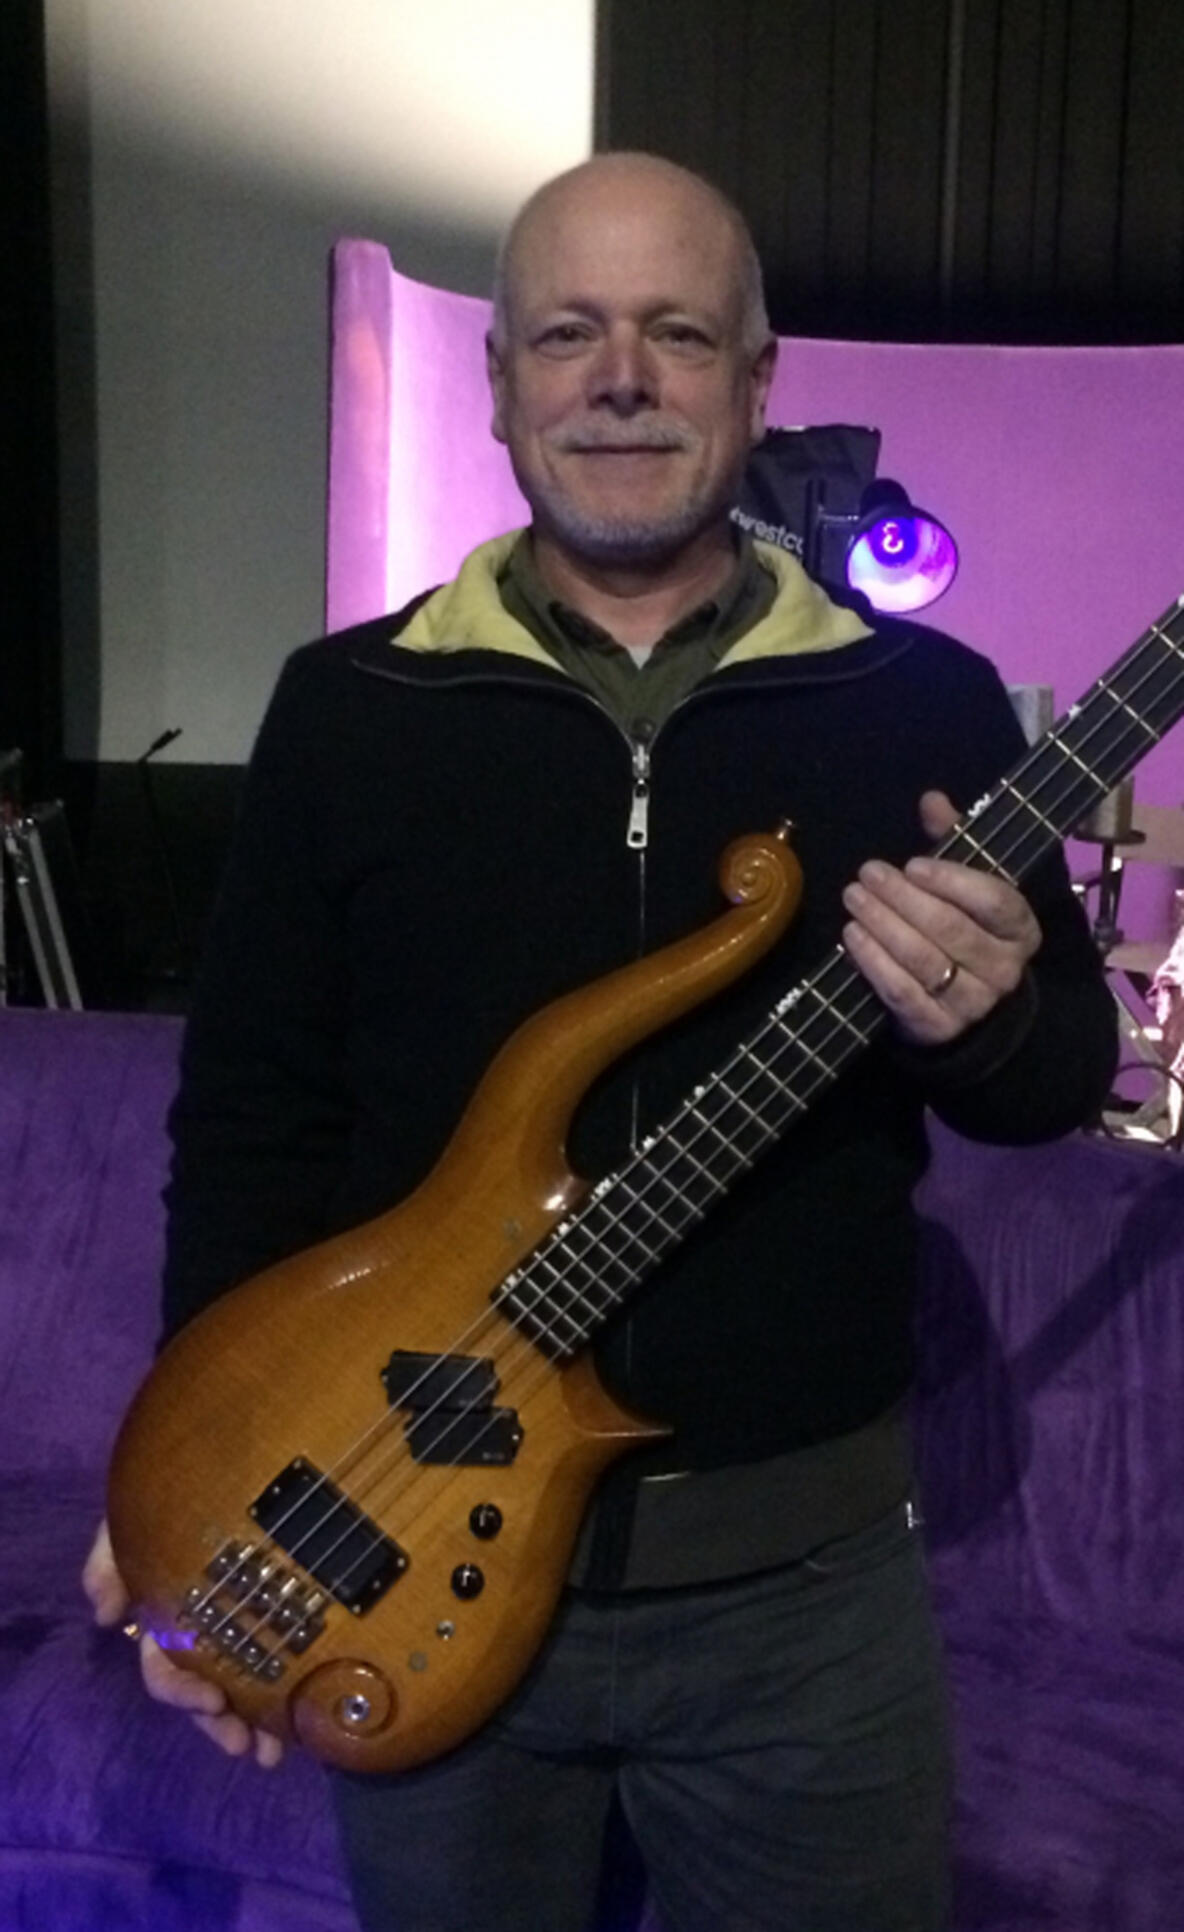 Gerald Ronning holding one of Prince's guitars